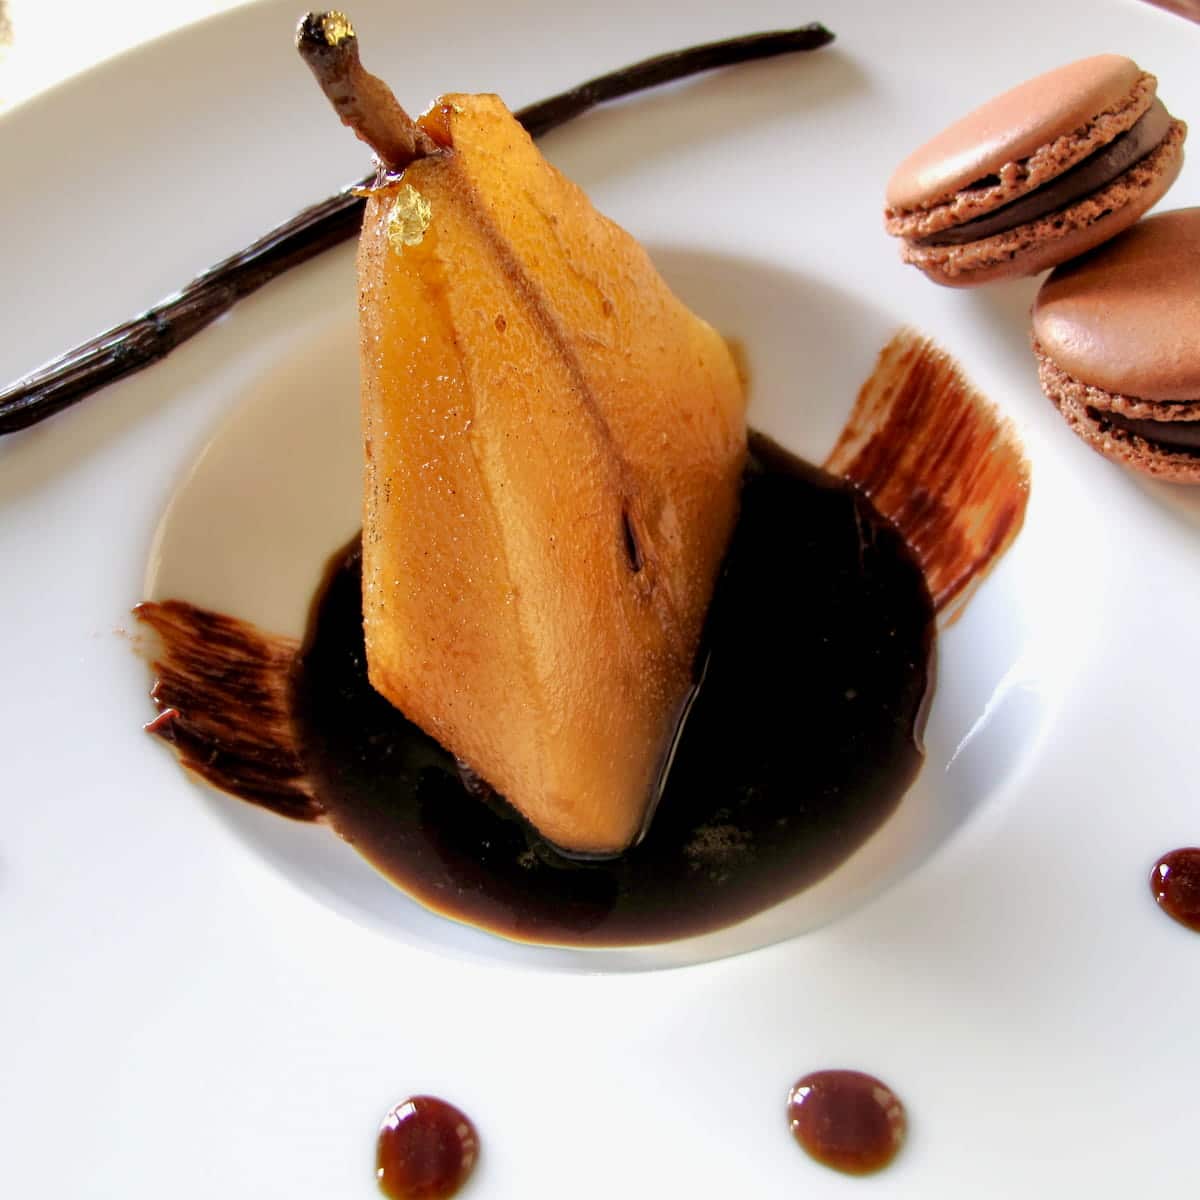 elegant dessert plate with half a poached pear sitting in a puddle of vanilla and coffee syrup with chocolate macarons